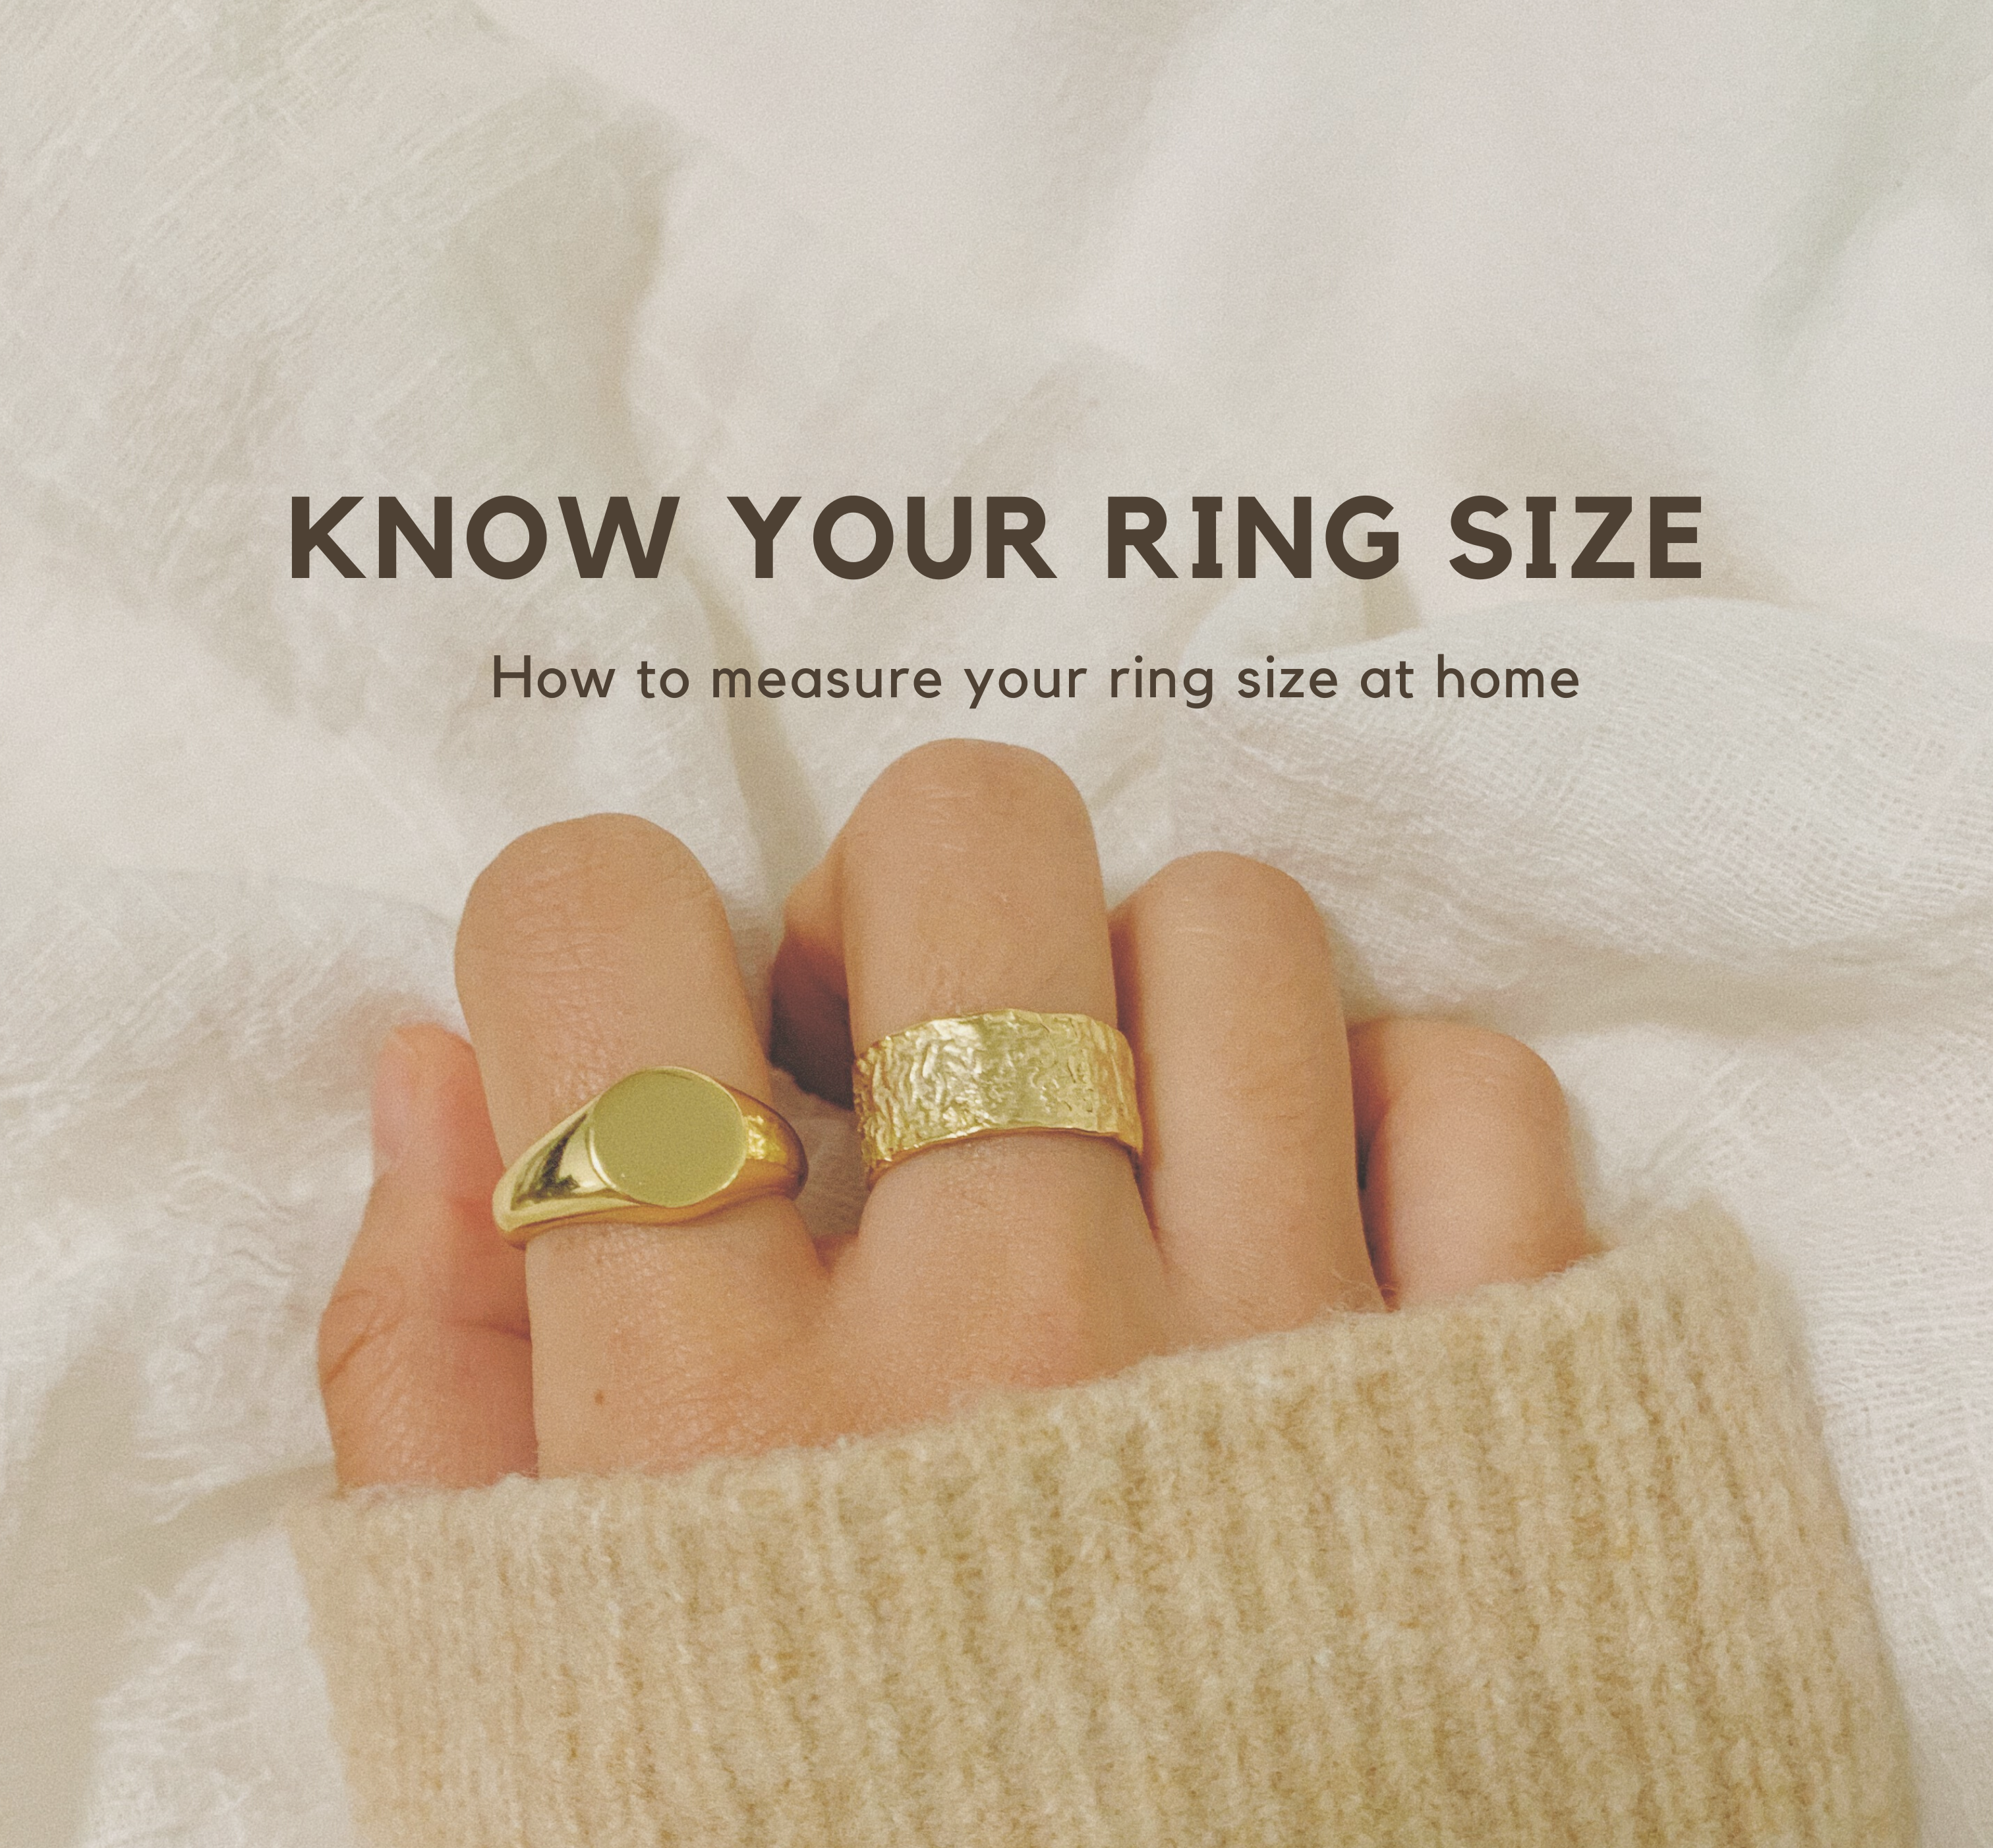 Learn How to Measure Your Ring Size at Home